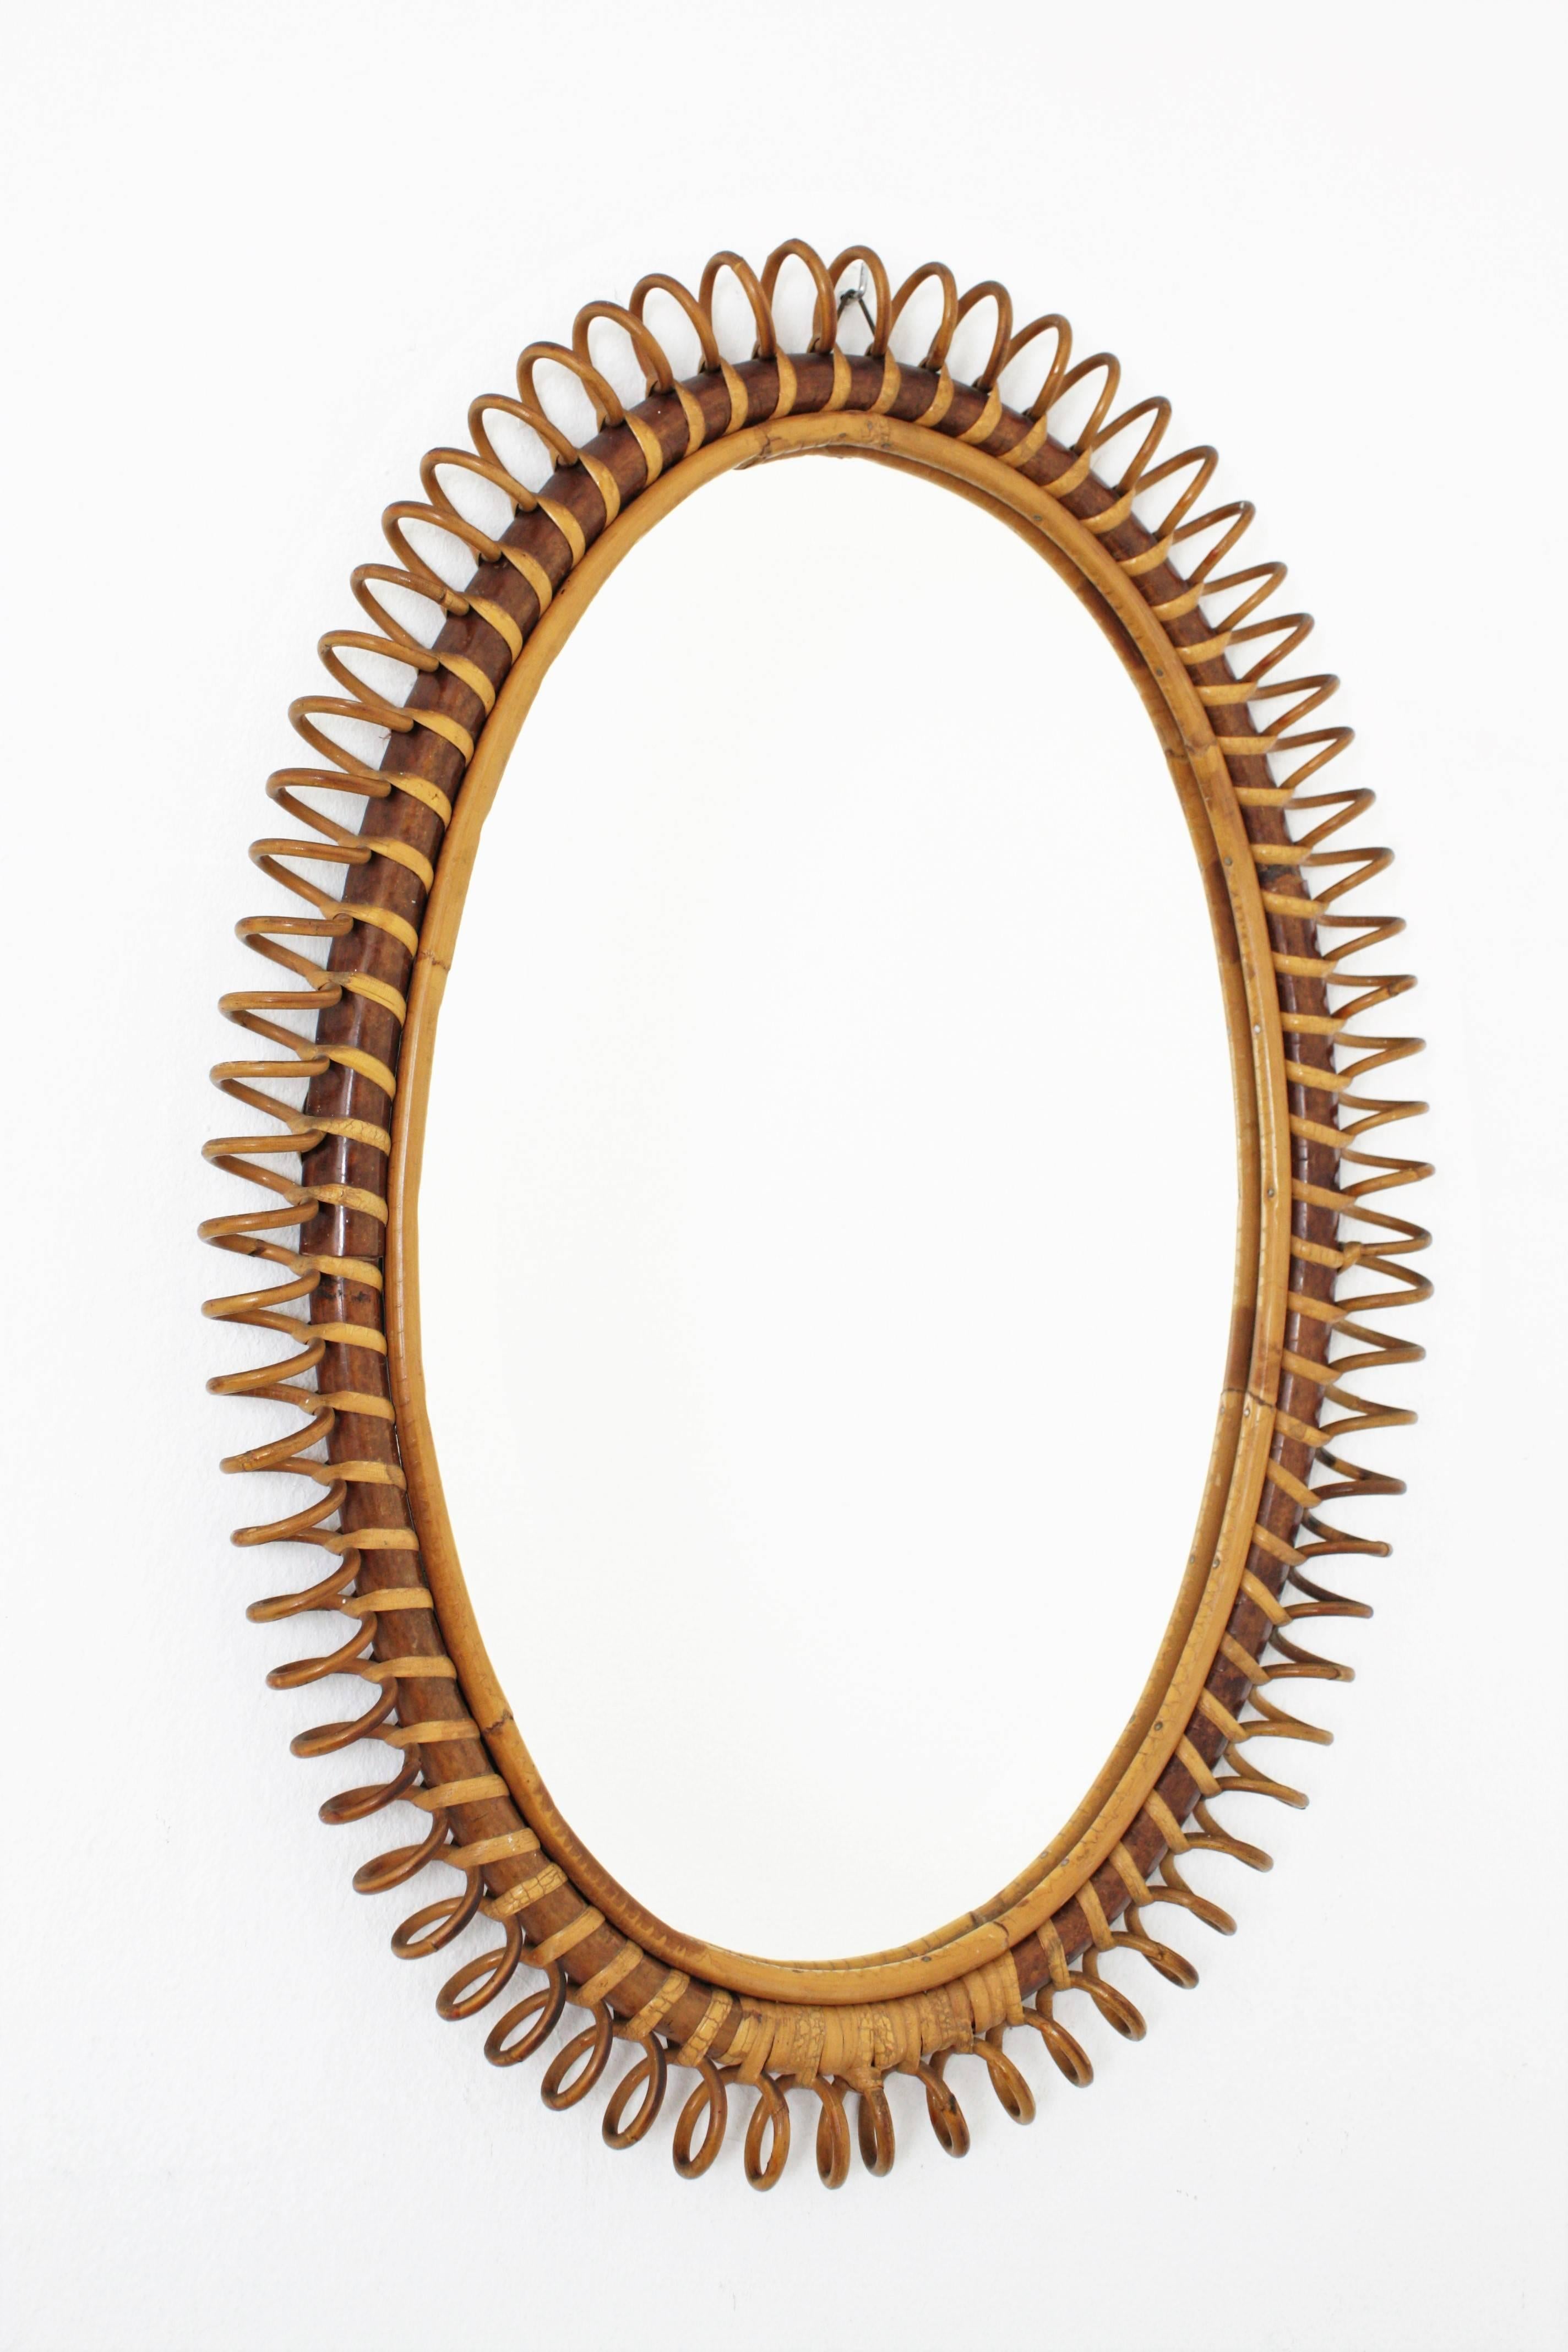 Italian Mid-Century bamboo and wicker helical design framed mirror. Finely hand-curved wicker work. Lovely to place it alone but also gorgeous placed with other mirrors in this manner crating a wall decoration. Italy, 1950s

